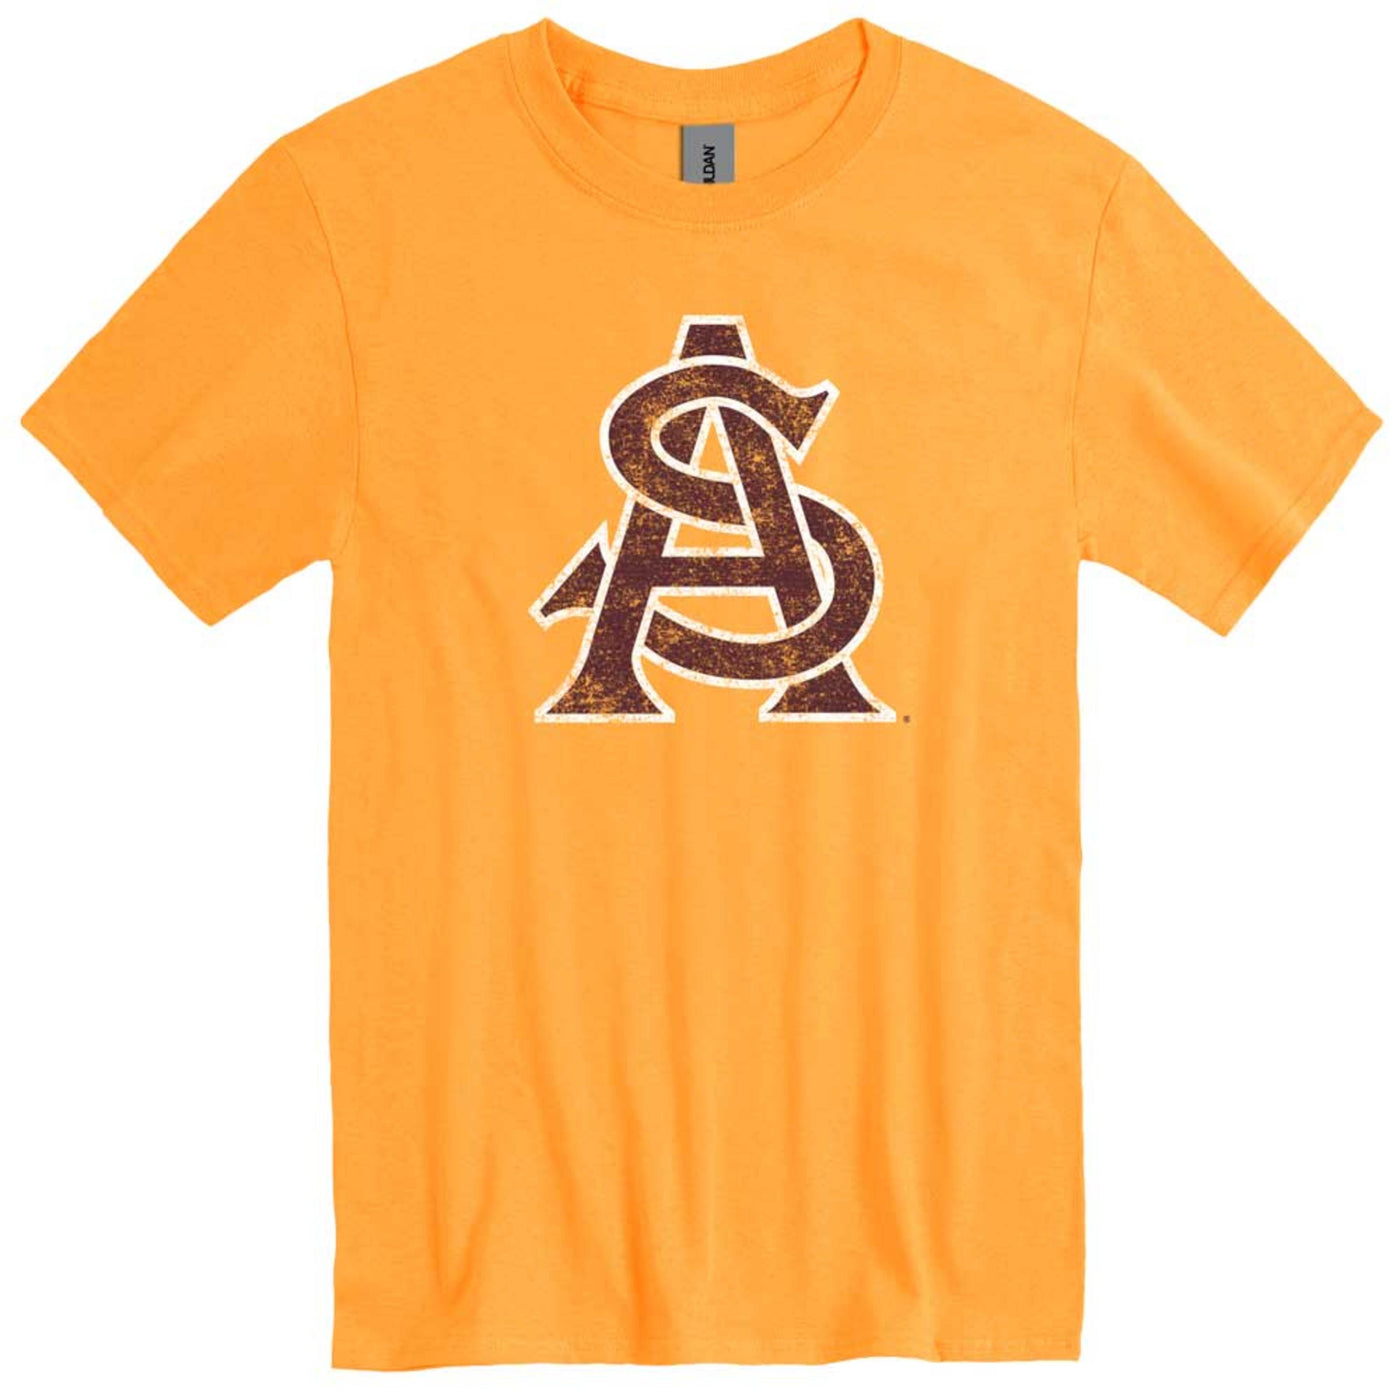 ASU gold tee with interlocking A&S logo in distressed maroon outlined in white